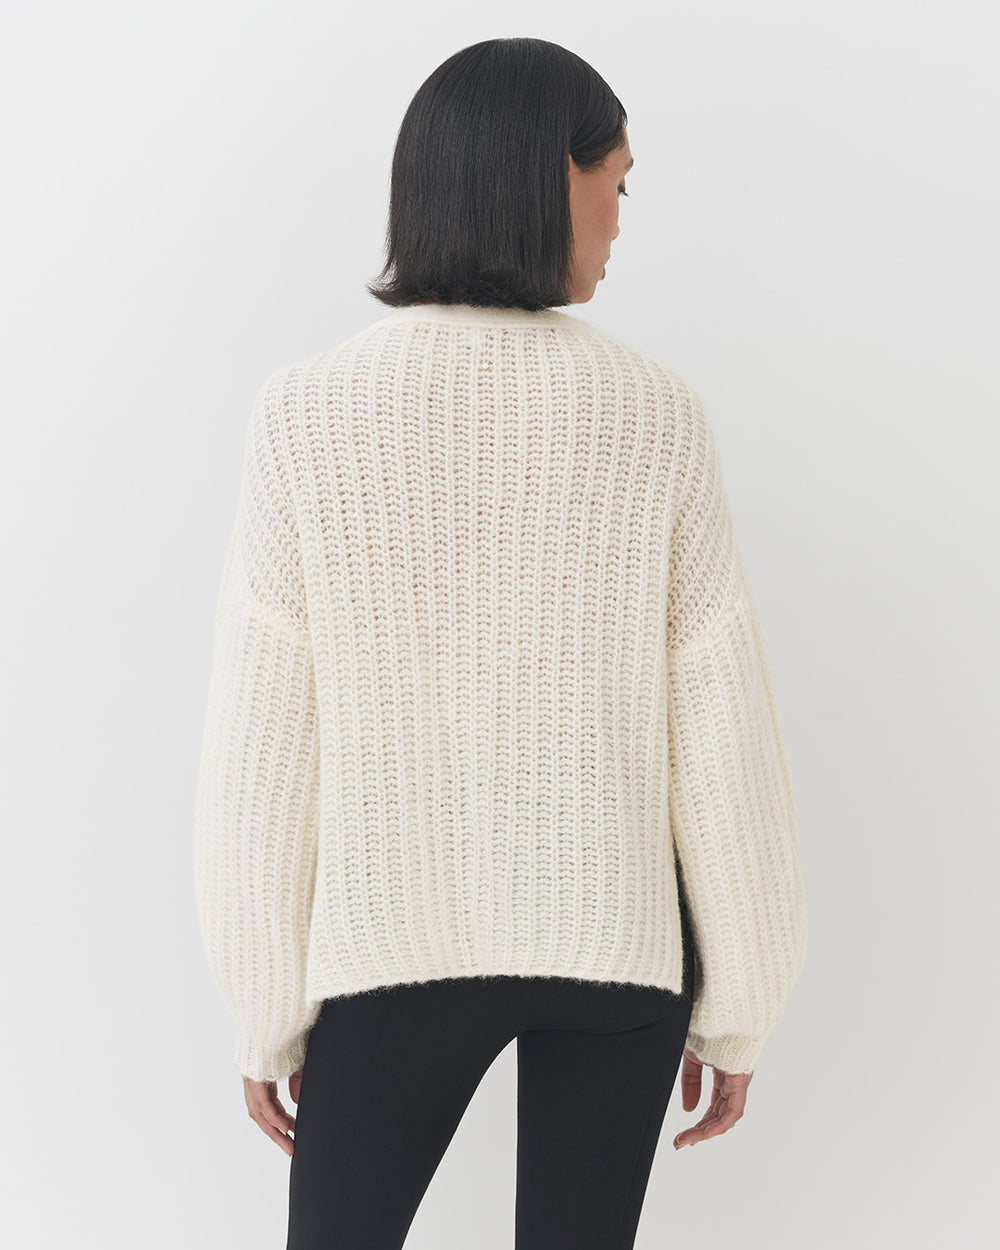 Woman in a sweater viewed from the back standing against a plain background.